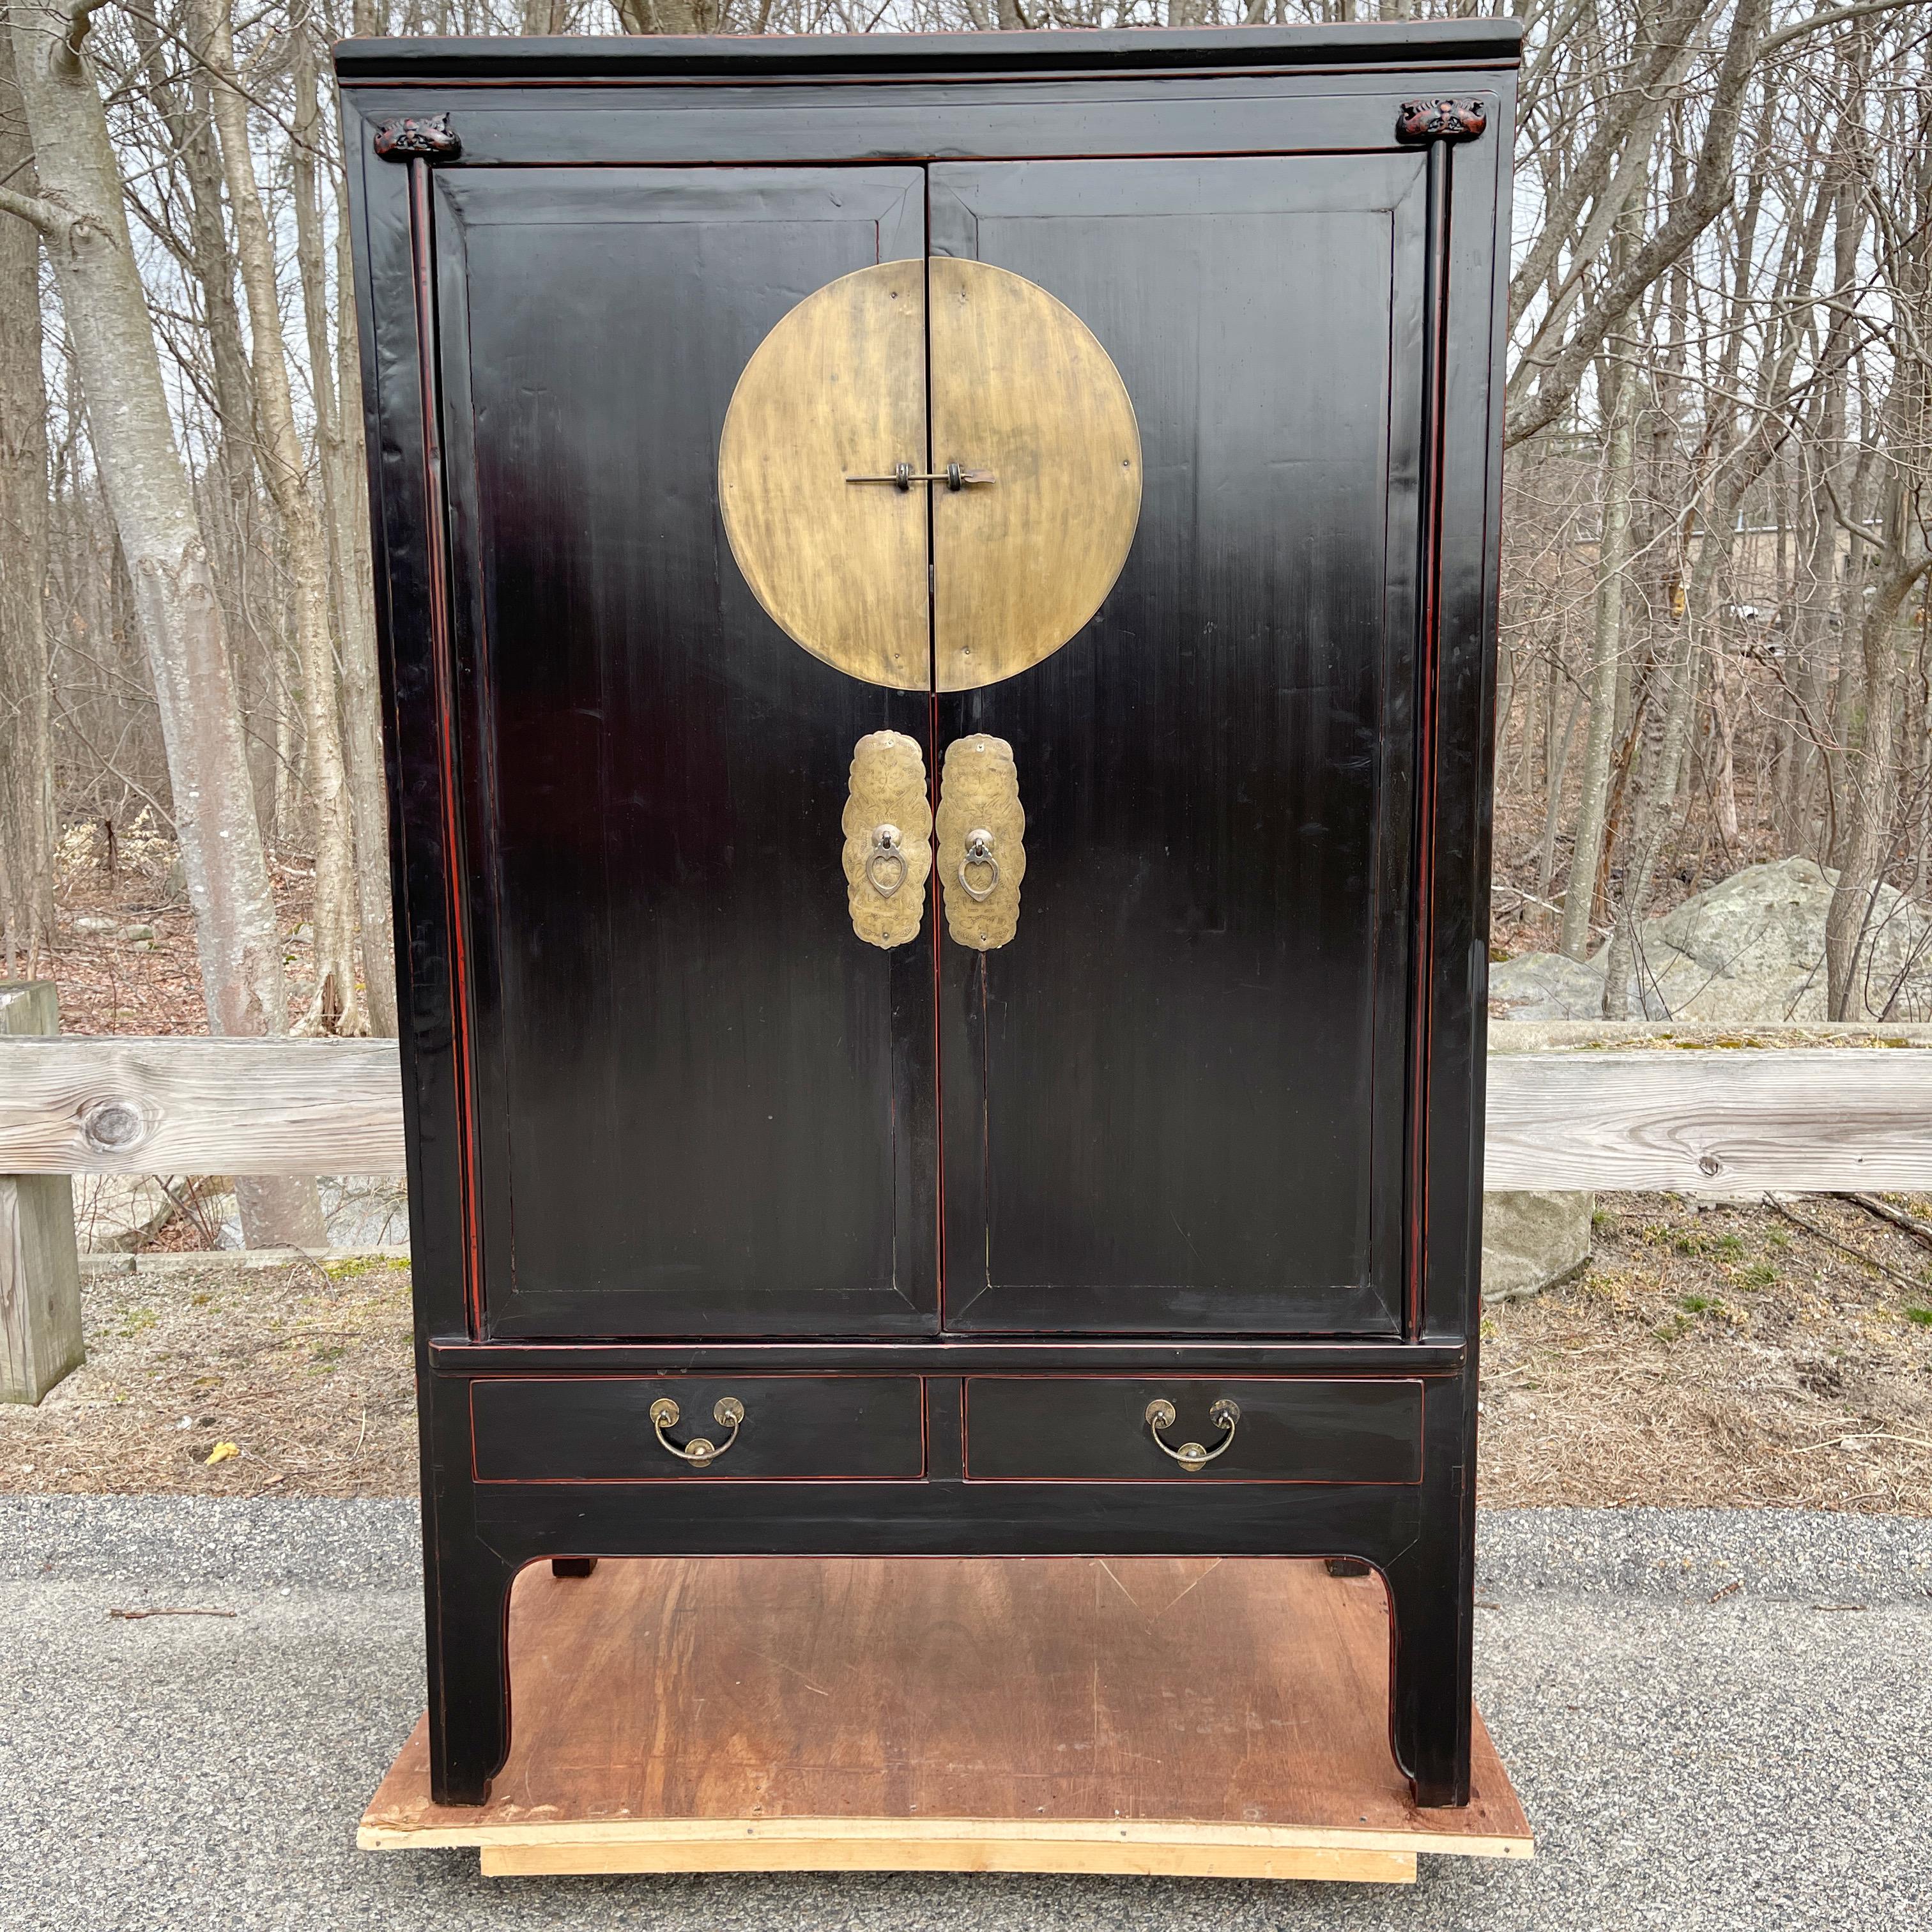 Chinese Qing Dynasty wedding cabinet in black lacquer with red accents featuring large circular brass medallion hardware on two 45 inch high doors above two drawers.
The interior is fitted with a removable shelf above two side by side drawers and